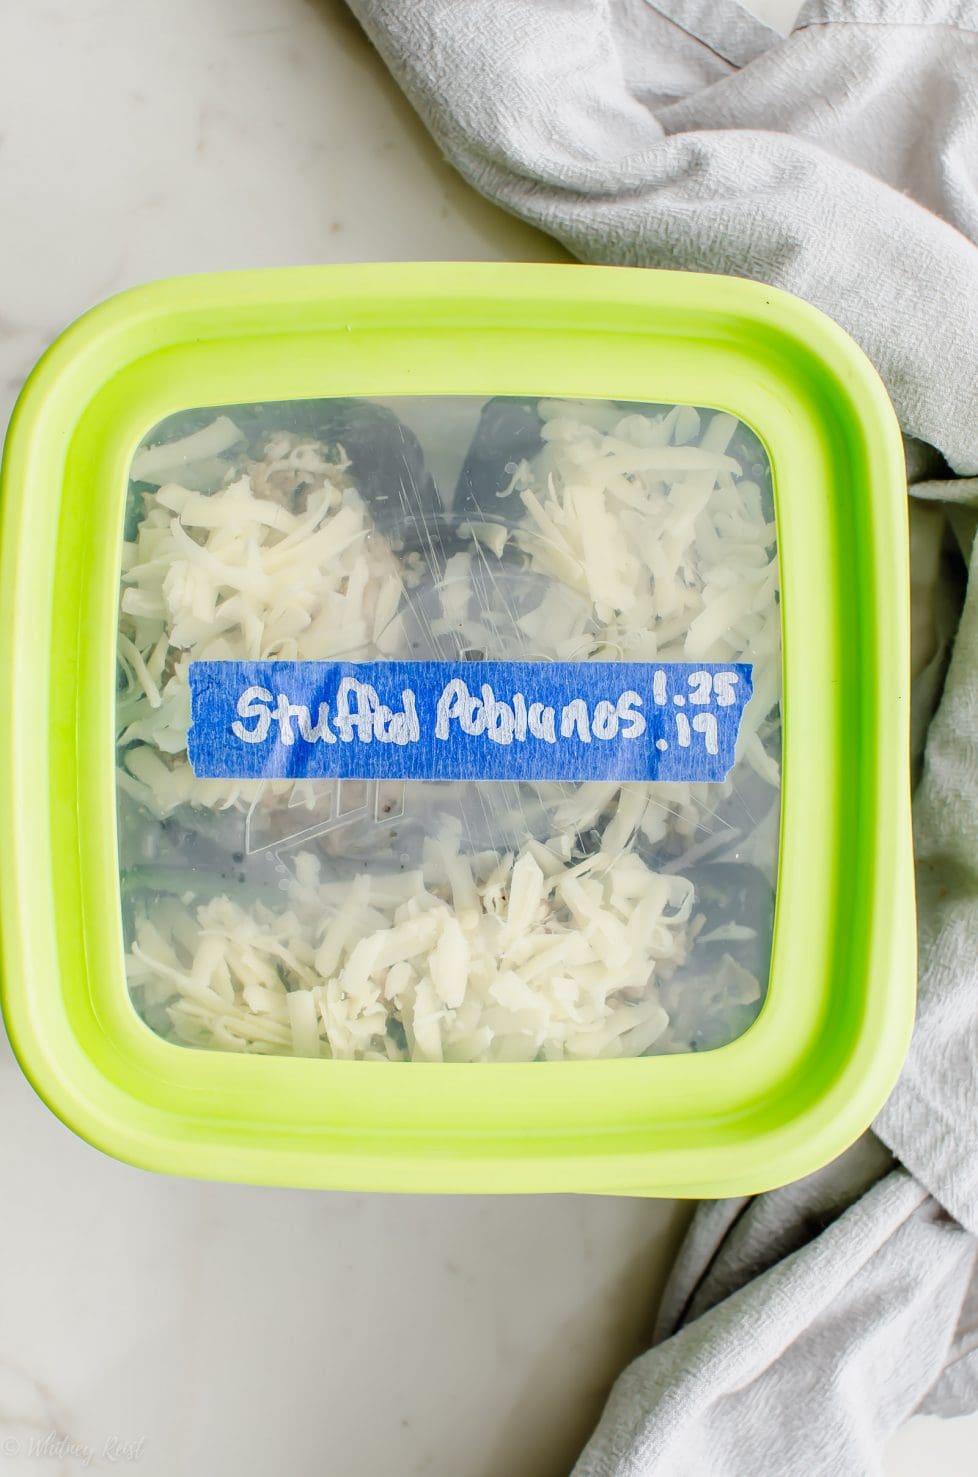 A freezer container filled with stuffed poblano peppers with a date and name label.